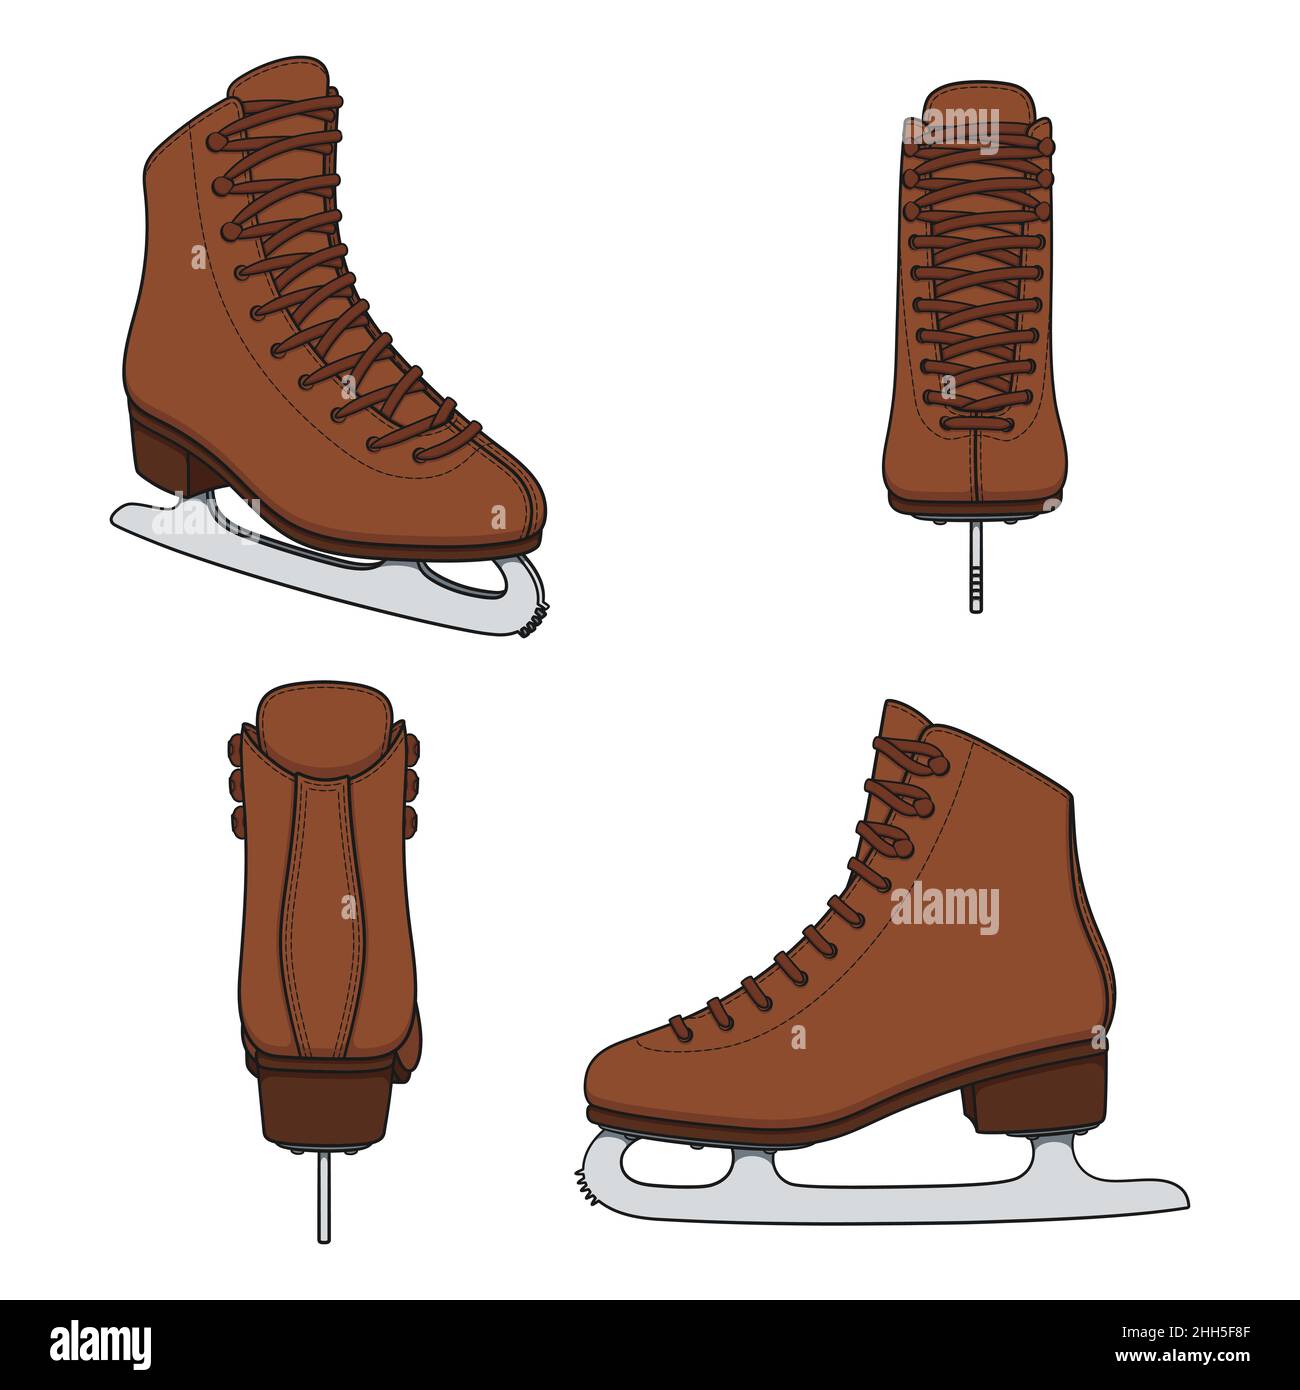 Set of color images with brown skates for figure skating. Isolated vector objects on a white background. Stock Vector